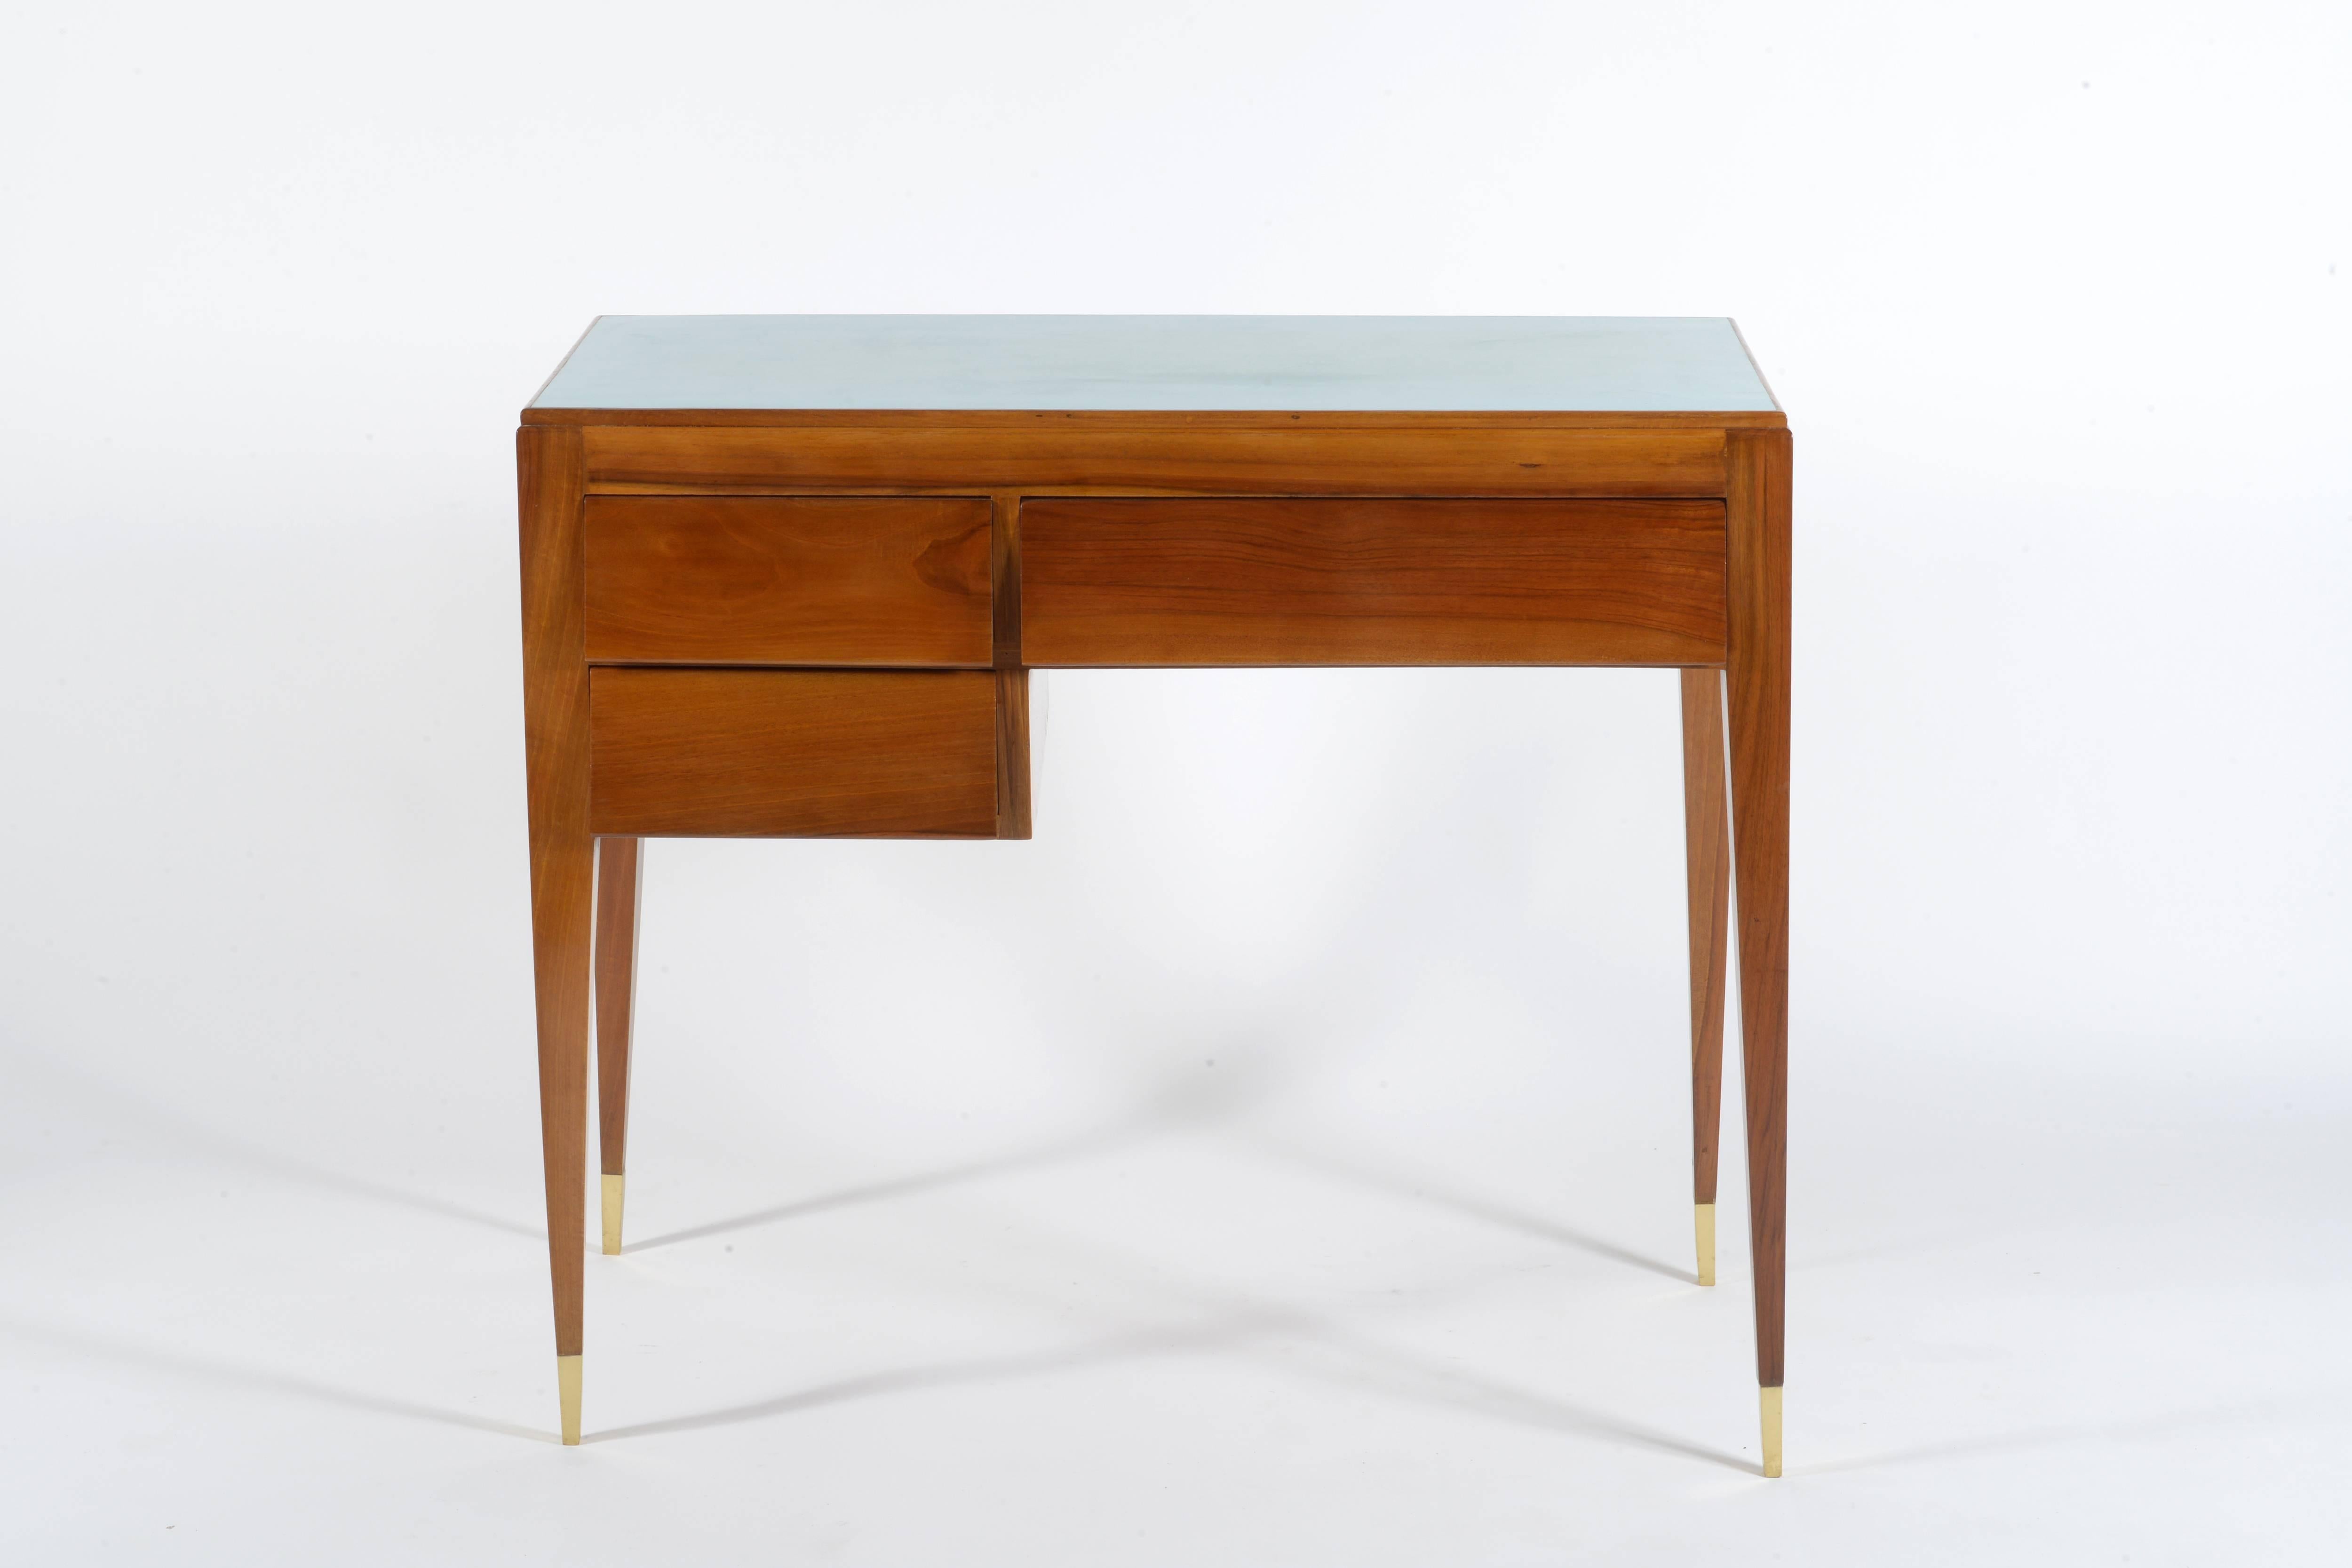 Four slender legs with bronze end feet, three inclined drawers.
Solid walnut and formica top.